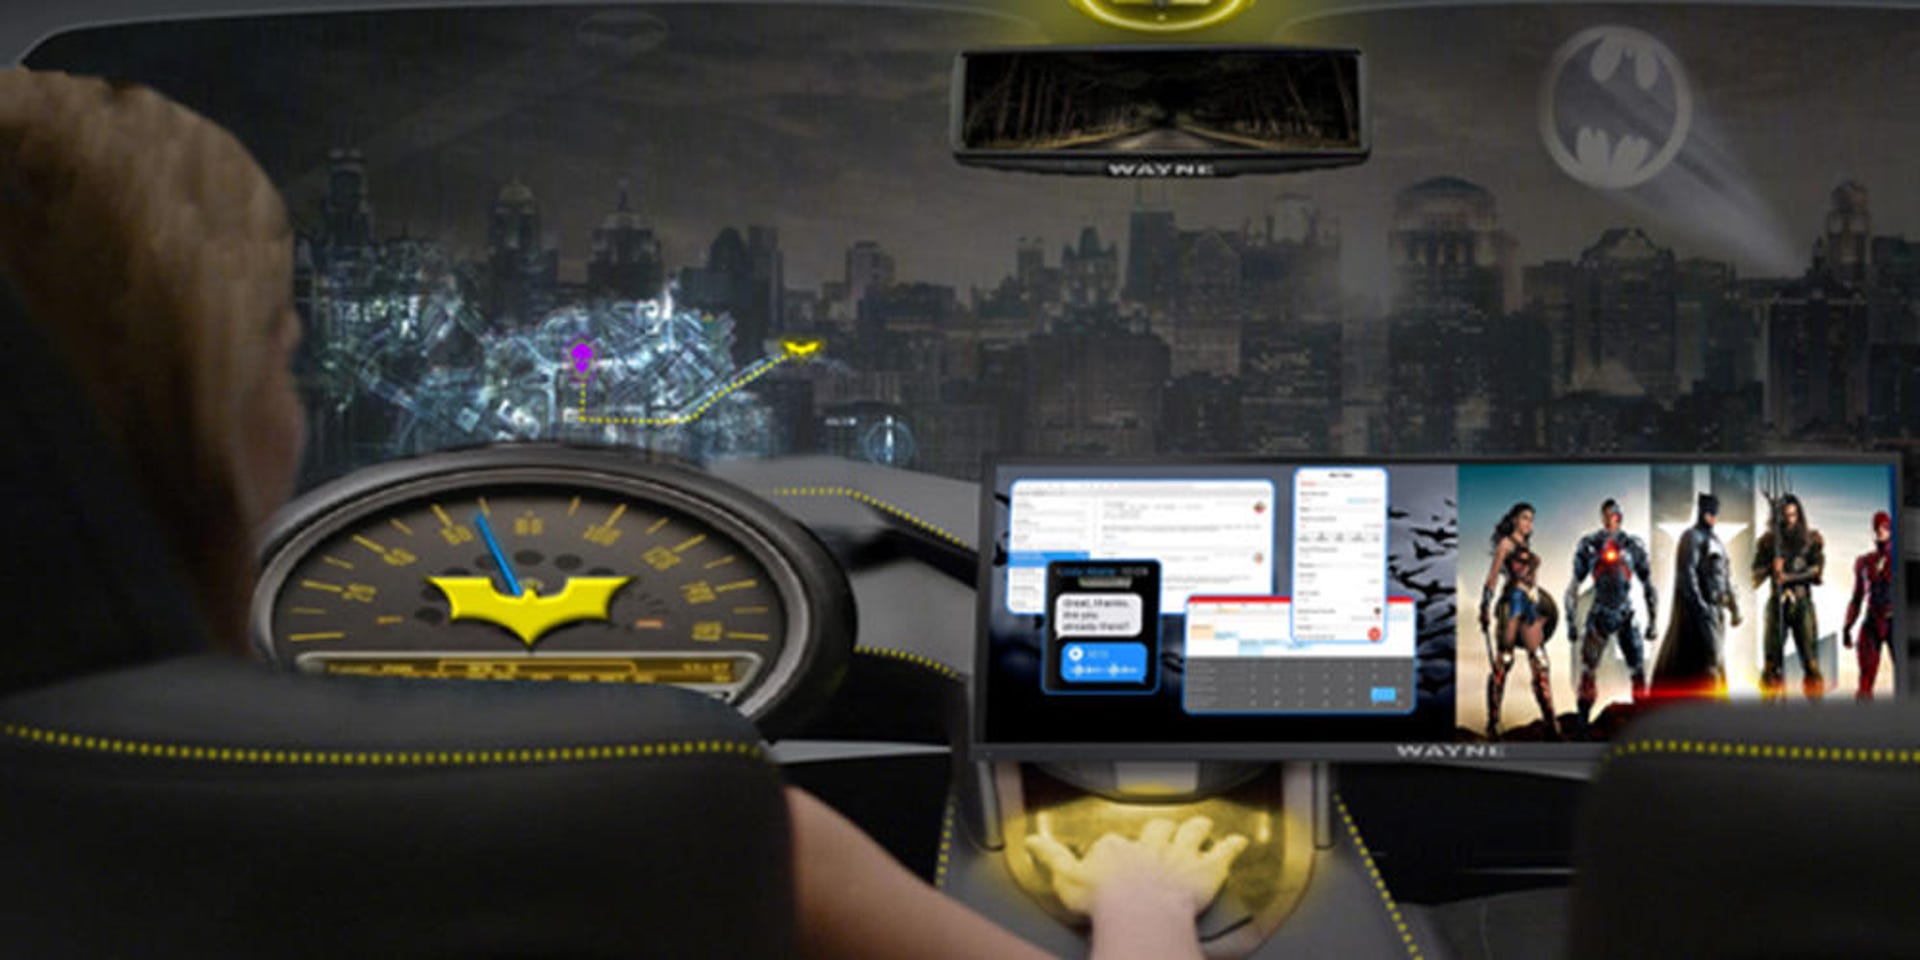 Intel couples with Warner Bros. for in-car entertainment